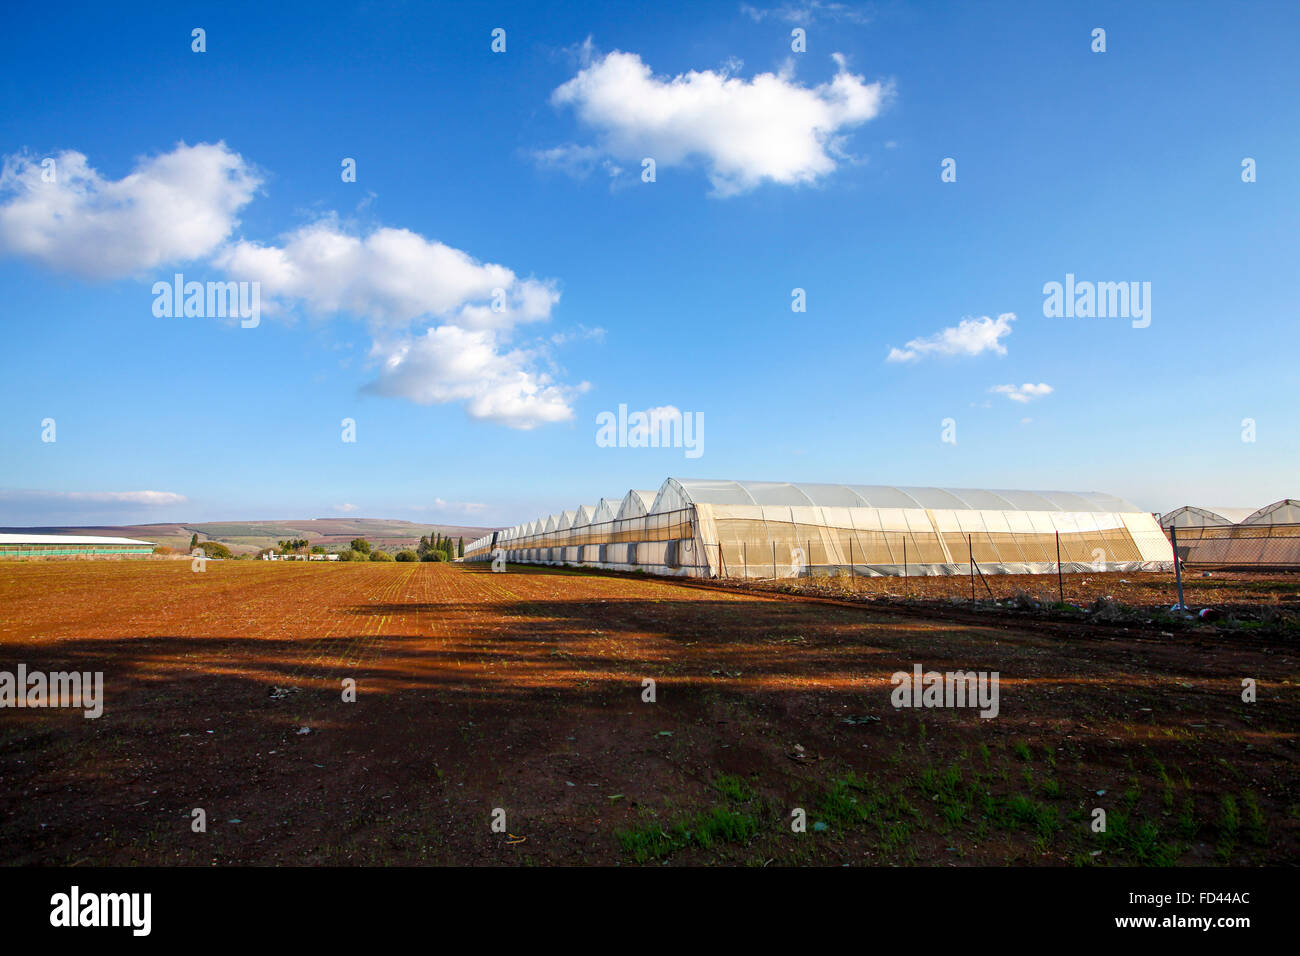 A row of Greenhouses, Photographed in Poria Illit, Lower Galilee, Israel Stock Photo